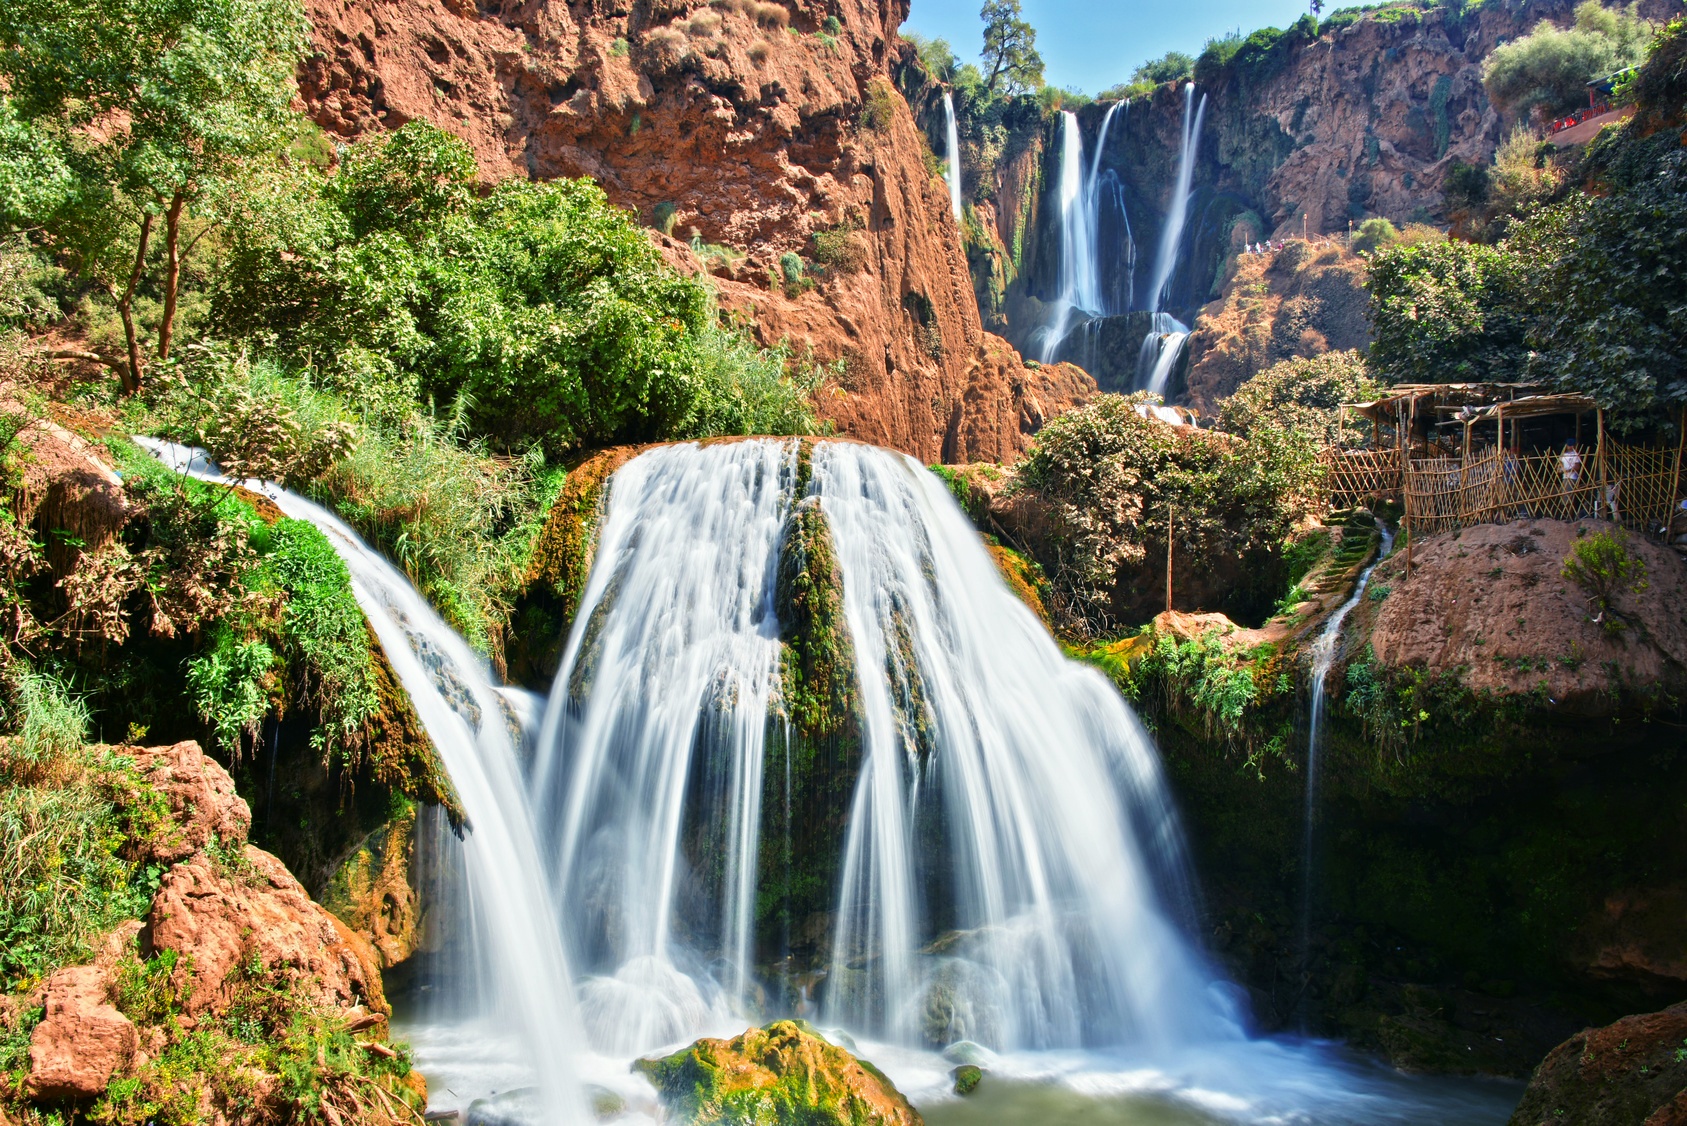 Morocco day trip from Marrakech to Ouzoud waterfalls to refresh in the cascades